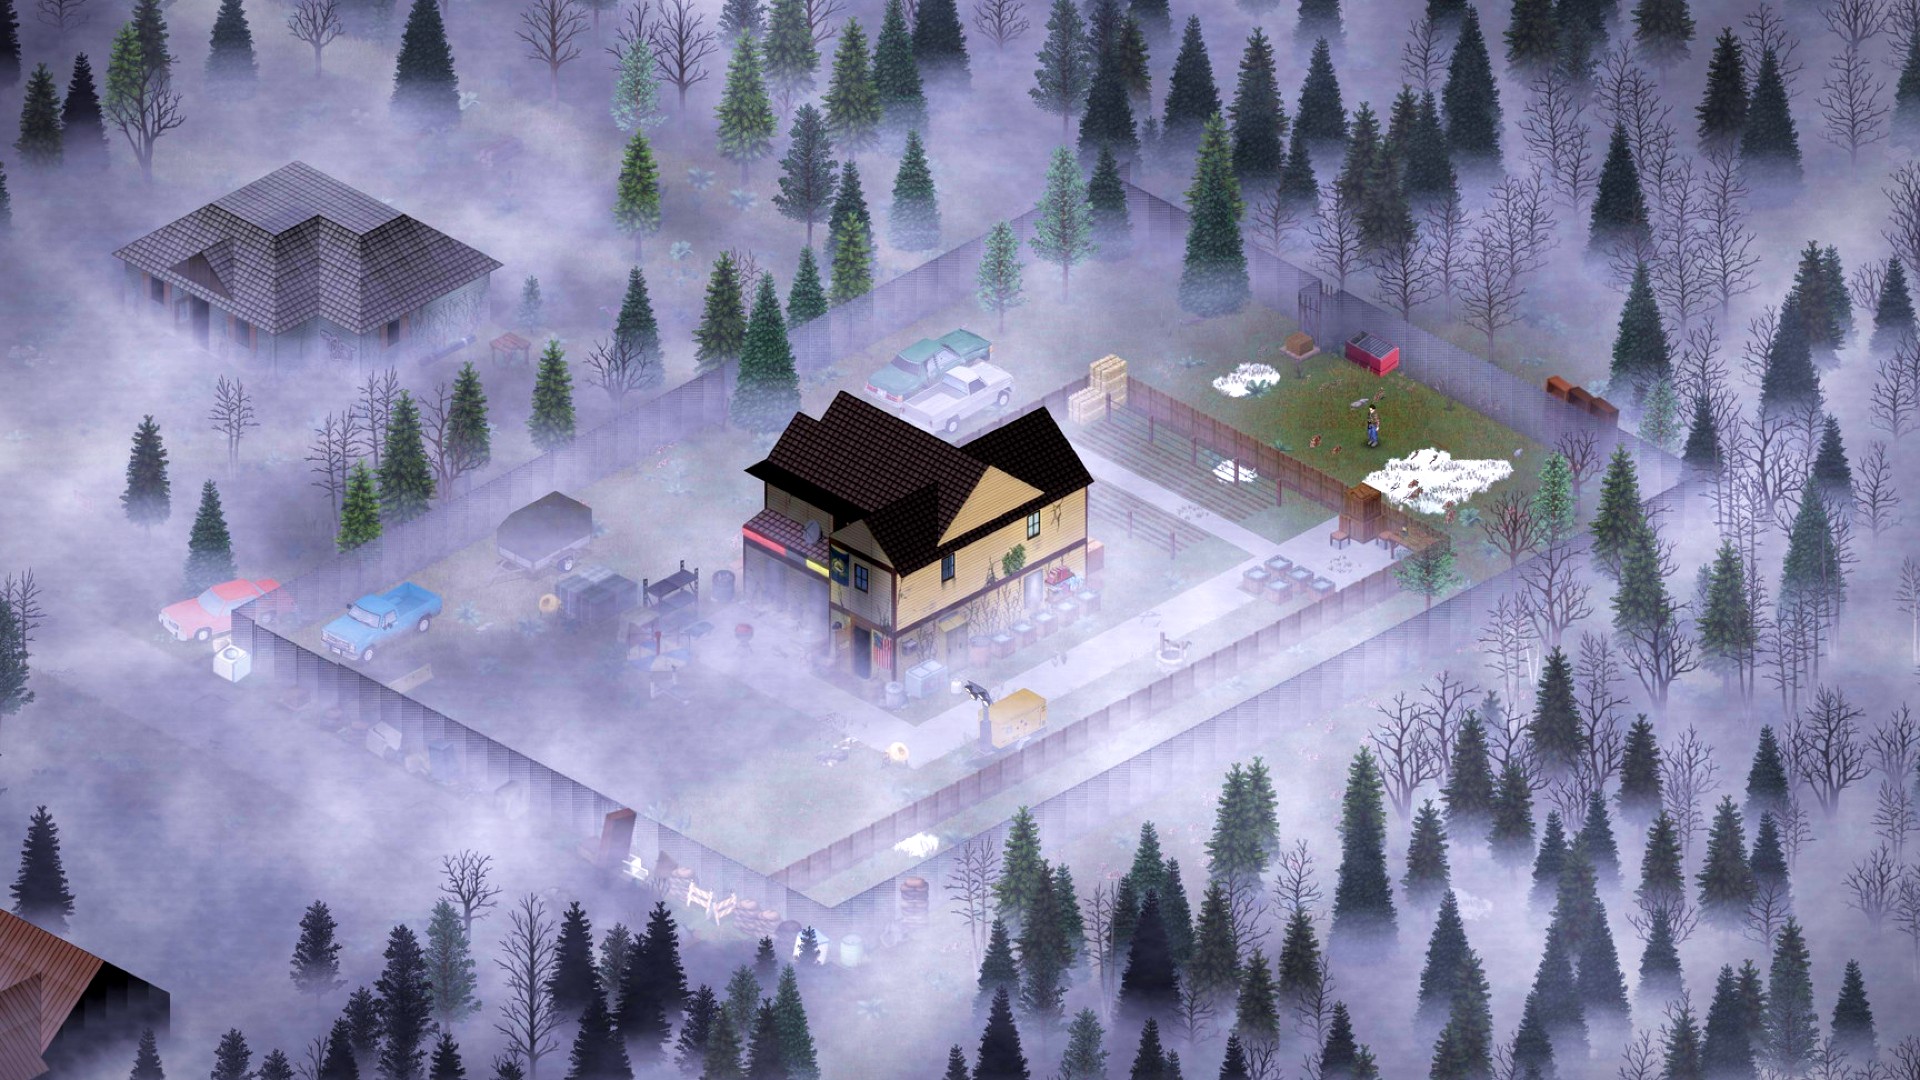 Project Zomboid screenshot showing a lone yellow house in the middle of a foggy forest